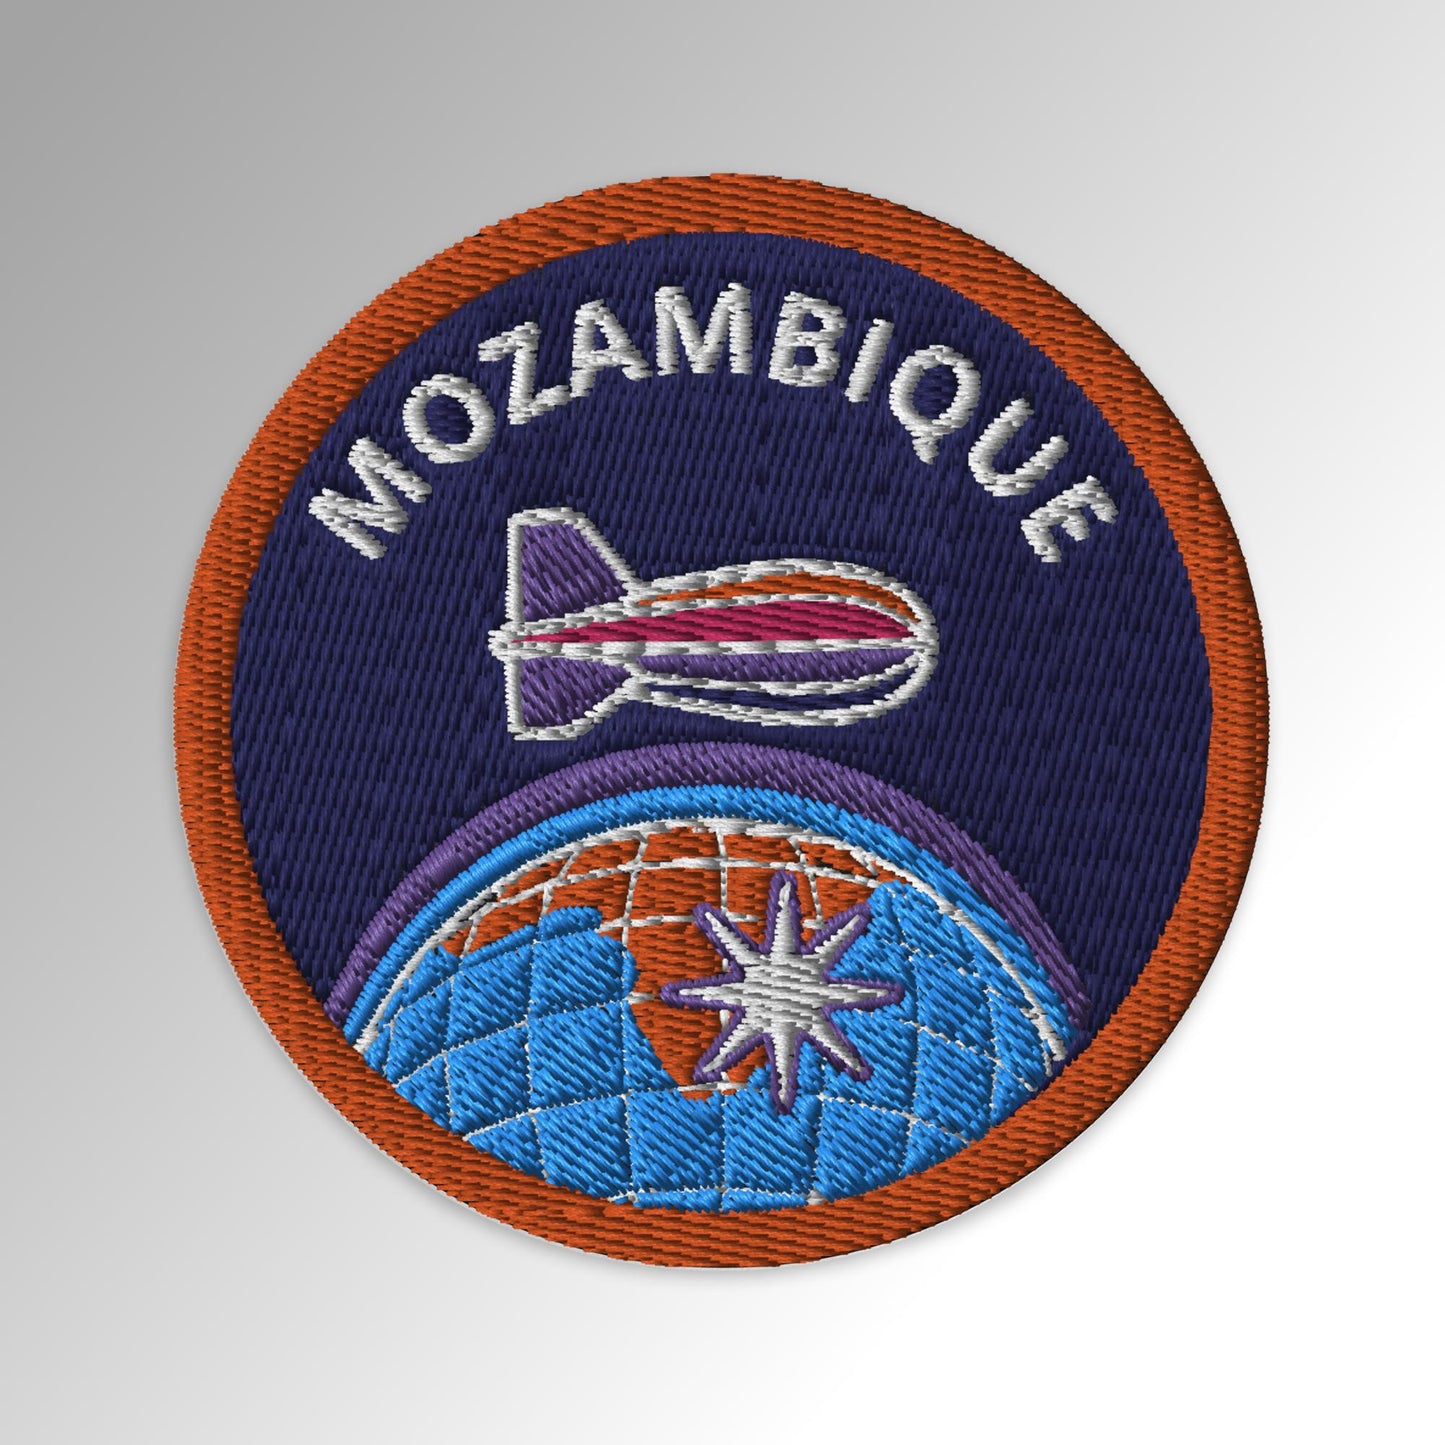 Mozambique Launch - Embroidered Patch